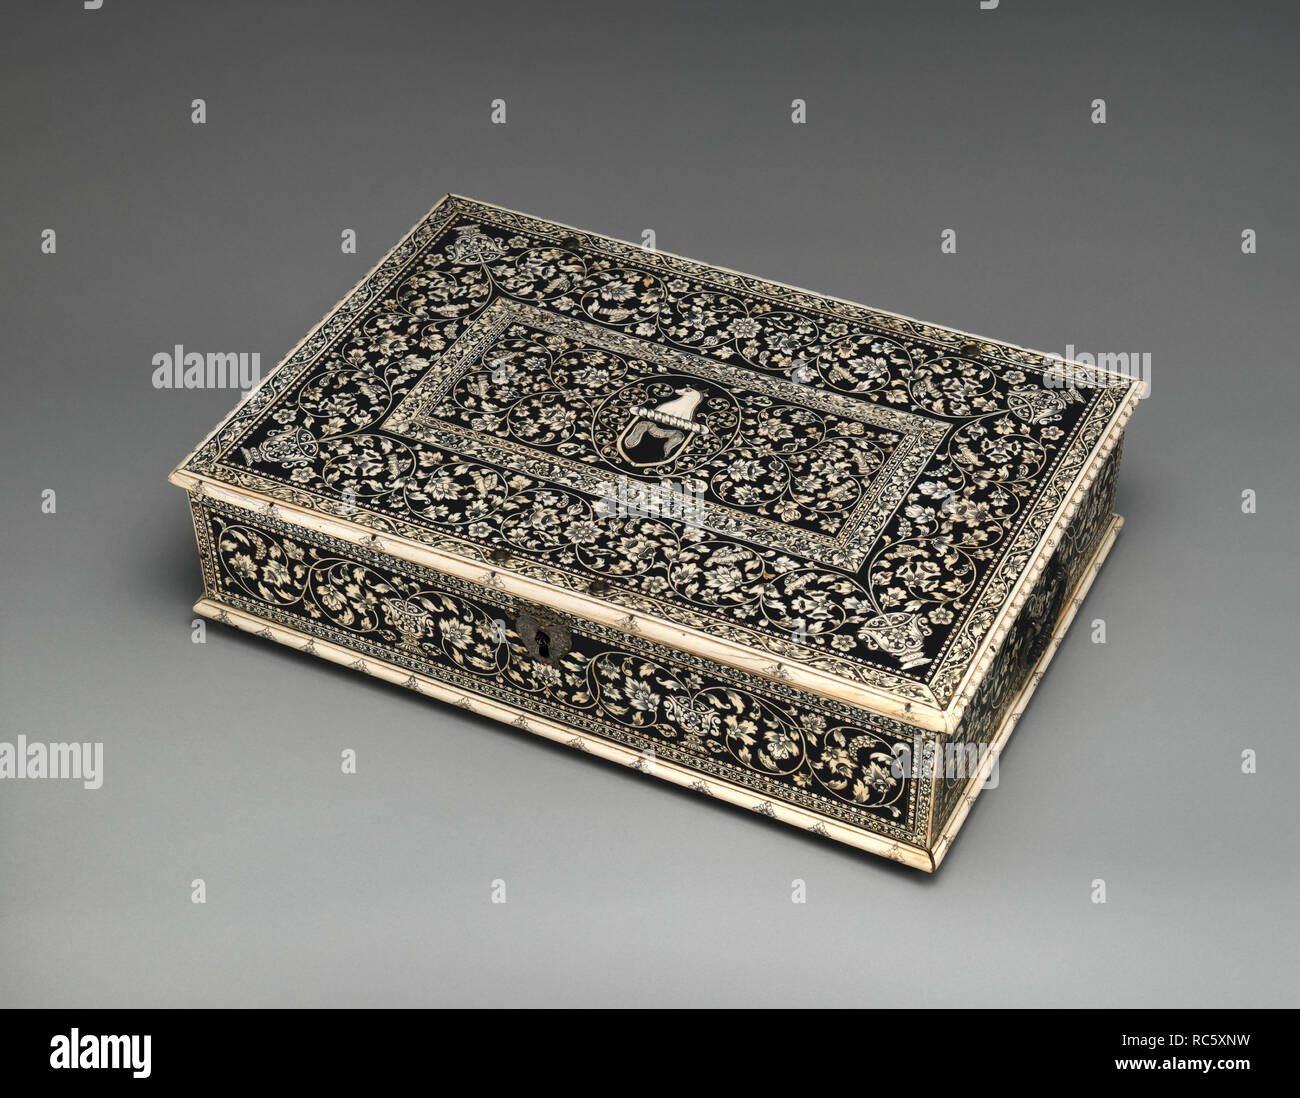 Casket. Culture: Indian, Vizagapatam. Dimensions: Overall (confirmed): 5 1/4 × 20 5/8 × 14 in. (13.3 × 52.4 × 35.6 cm). Date: ca. 1760-65.  Based on a European prototype but constructed from indigenous timber and densely decorated with ivory inlays displaying European ornament, this casket is an excellent example of an Anglo-Indian export piece. Writing boxes, rifles and gun boxes with European marquetry decoration are likely to have been used by Europeans. This particular casket is decorated with the crest of the Hastings family, presumably of Warren Hastings (1732-1818). Hastings had a brill Stock Photo